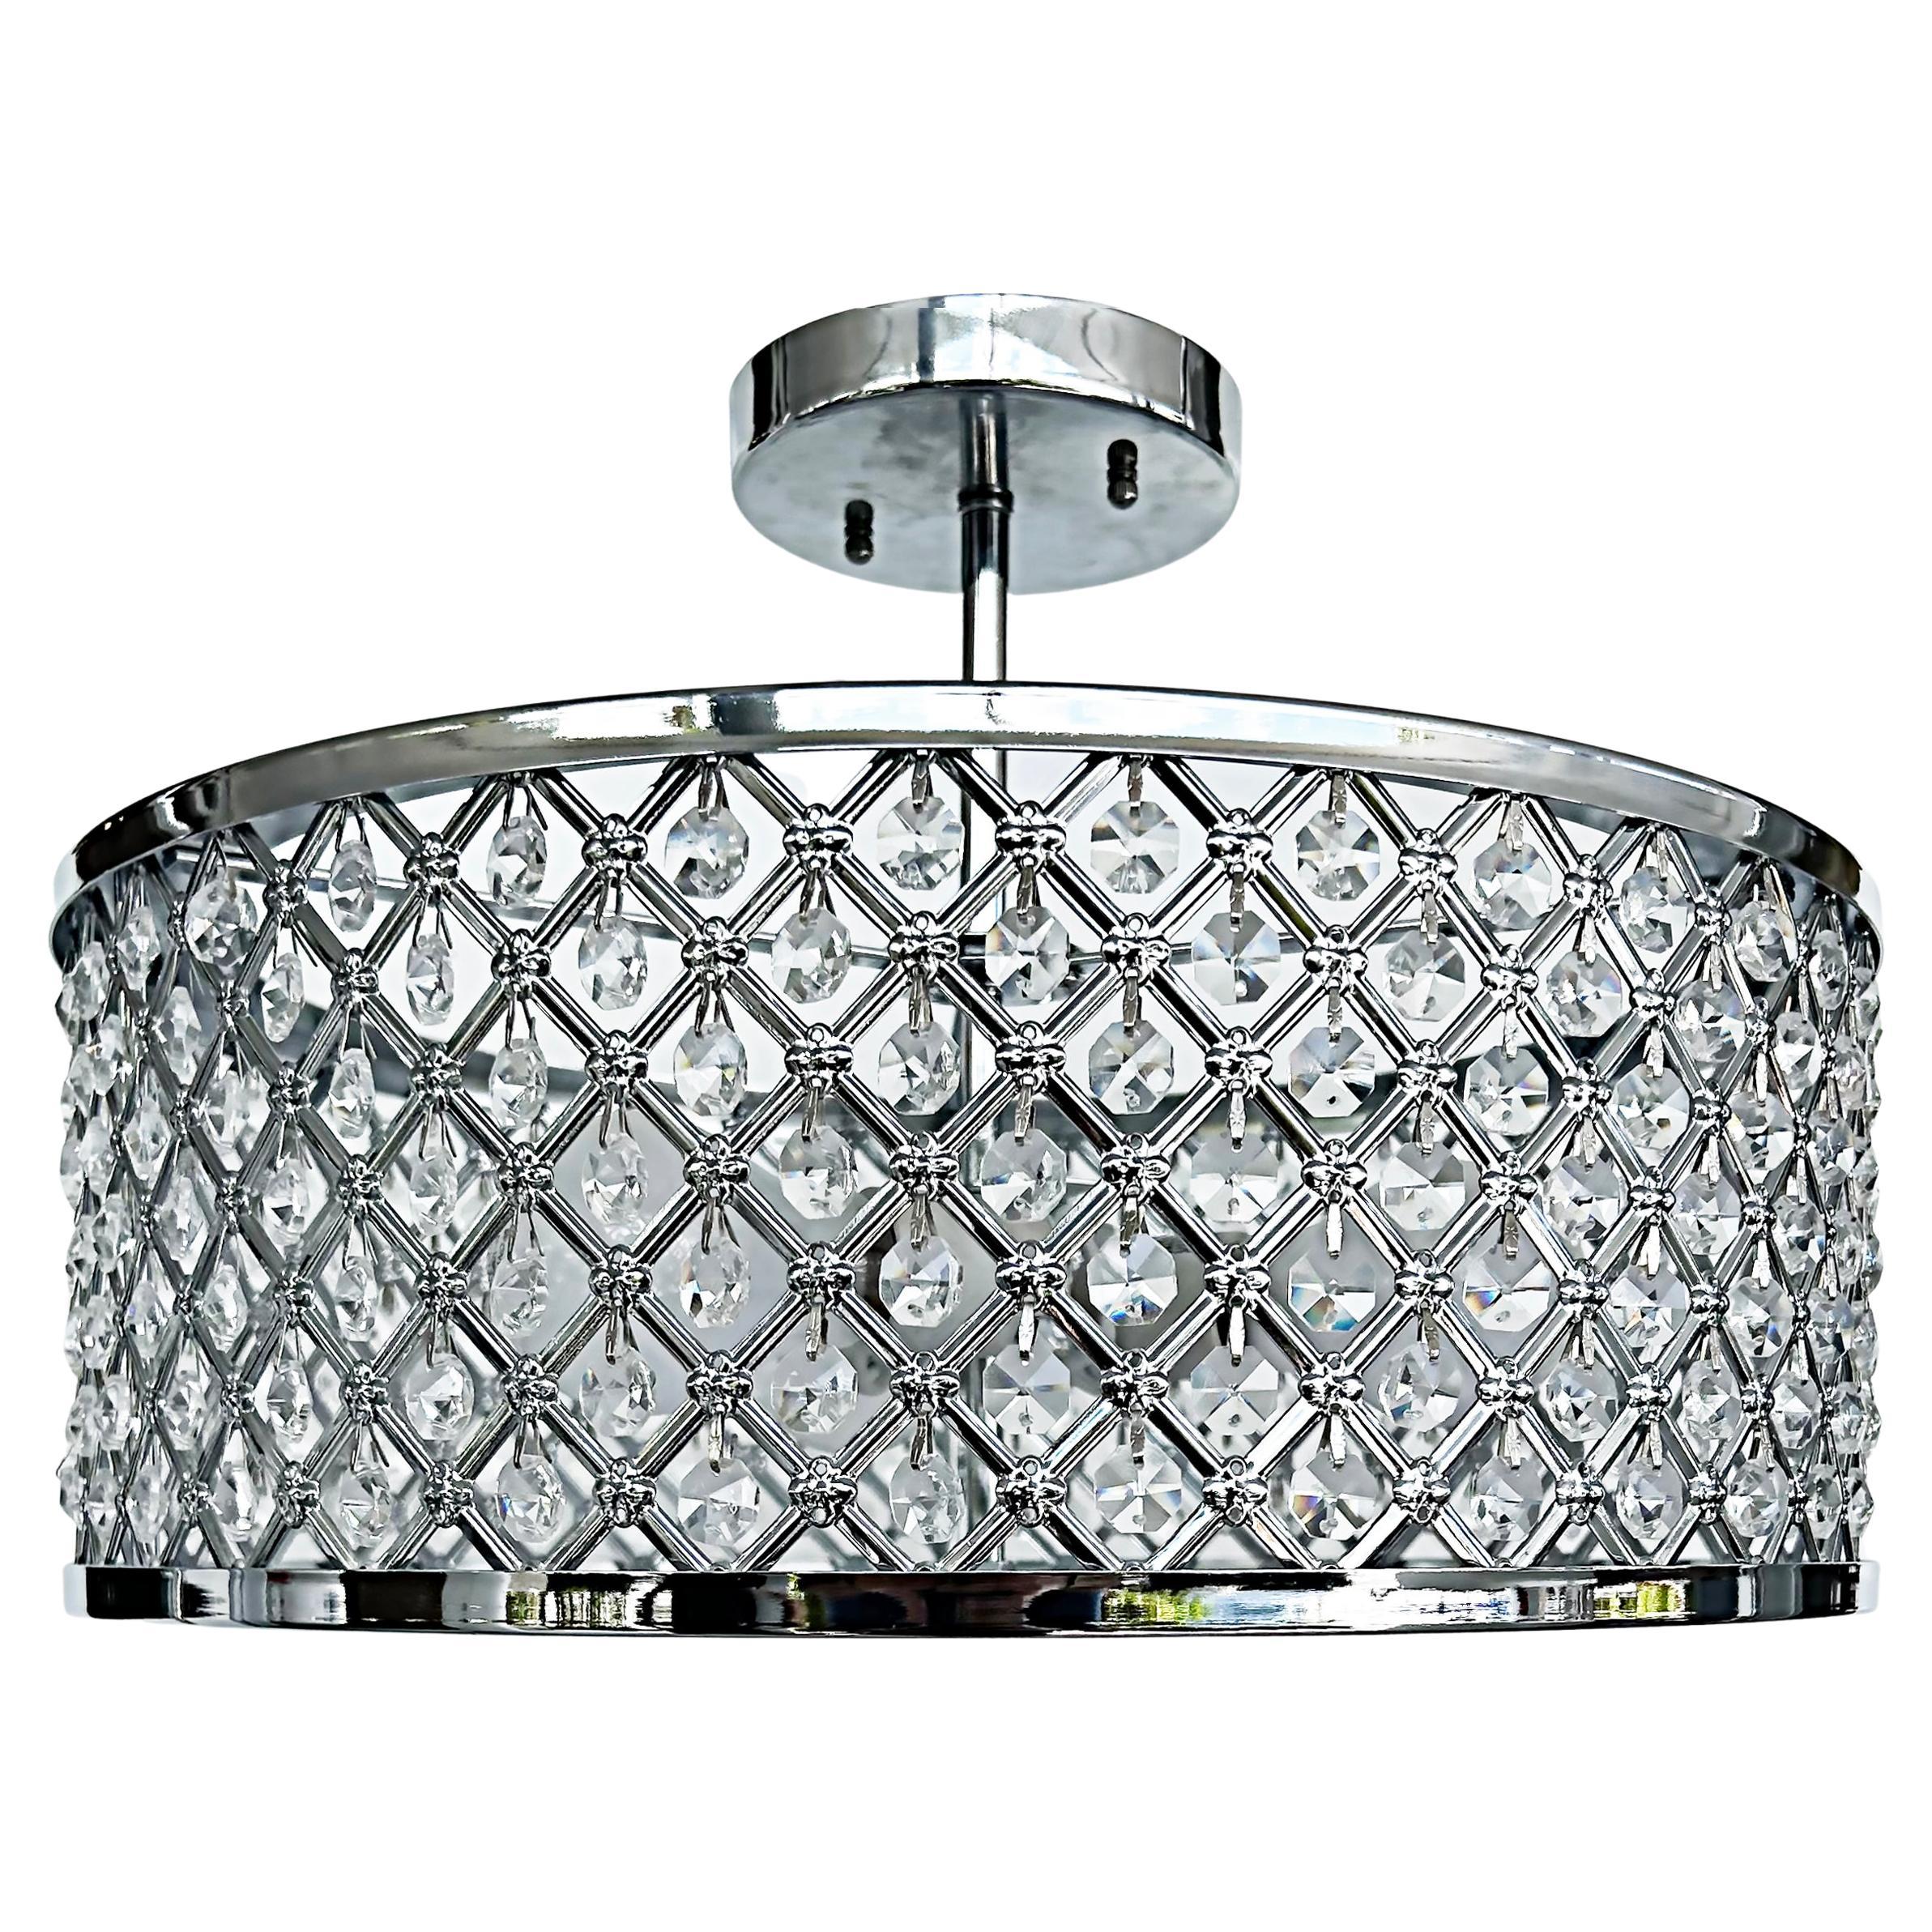 Cut glass and chrome flush mount ceiling light fixture, one available

Offered for sale individually is a round modern chrome flush-mount fixture that has a lattice grid pattern body with suspended crystals within. The light accommodates 3 standard